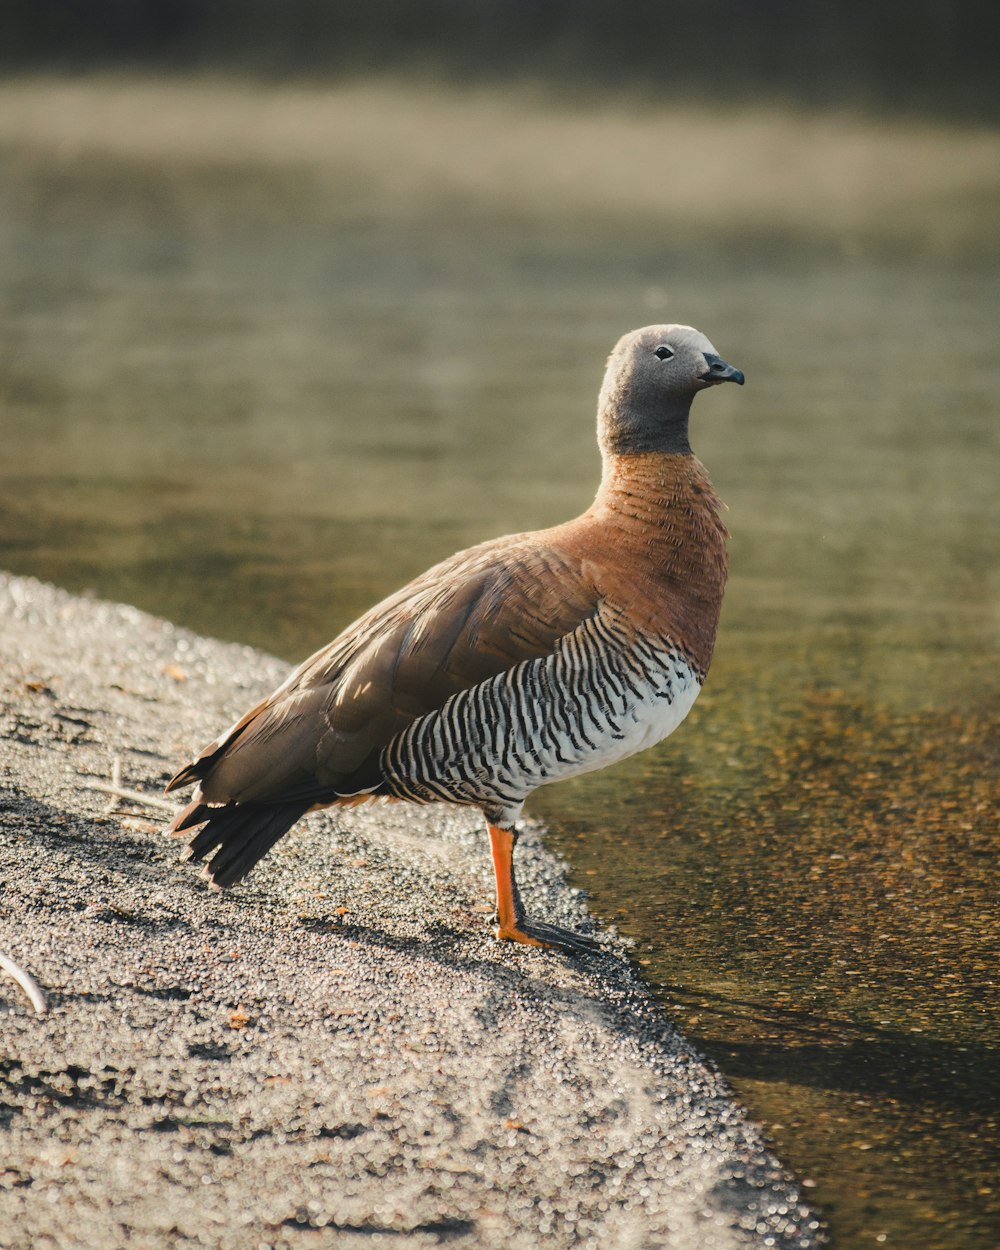 a bird standing on the edge of a body of water